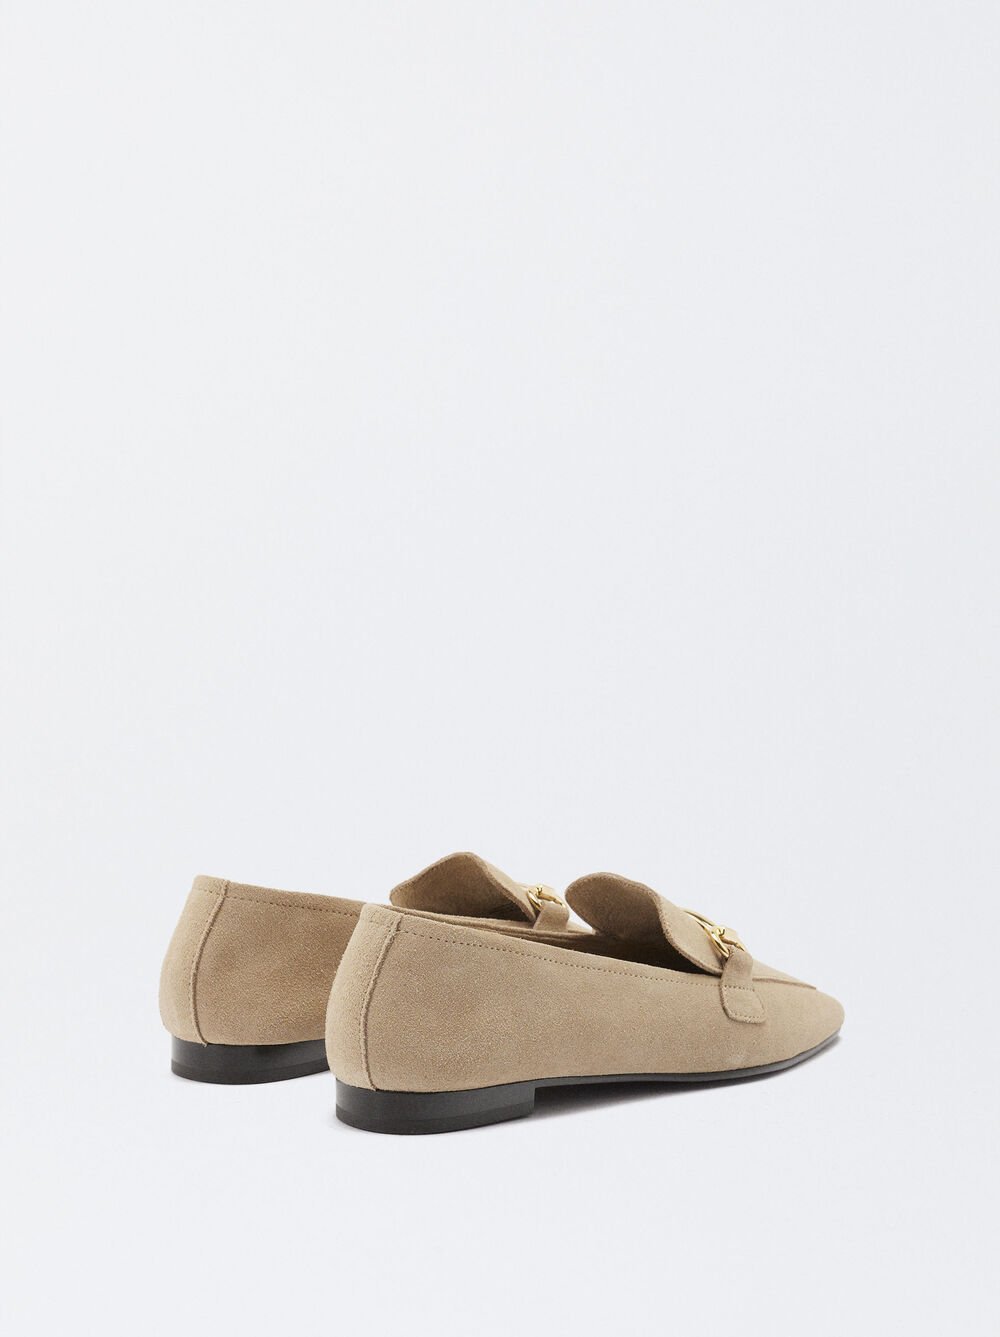 Online Exclusive - Suede Leather Loafers Buckle